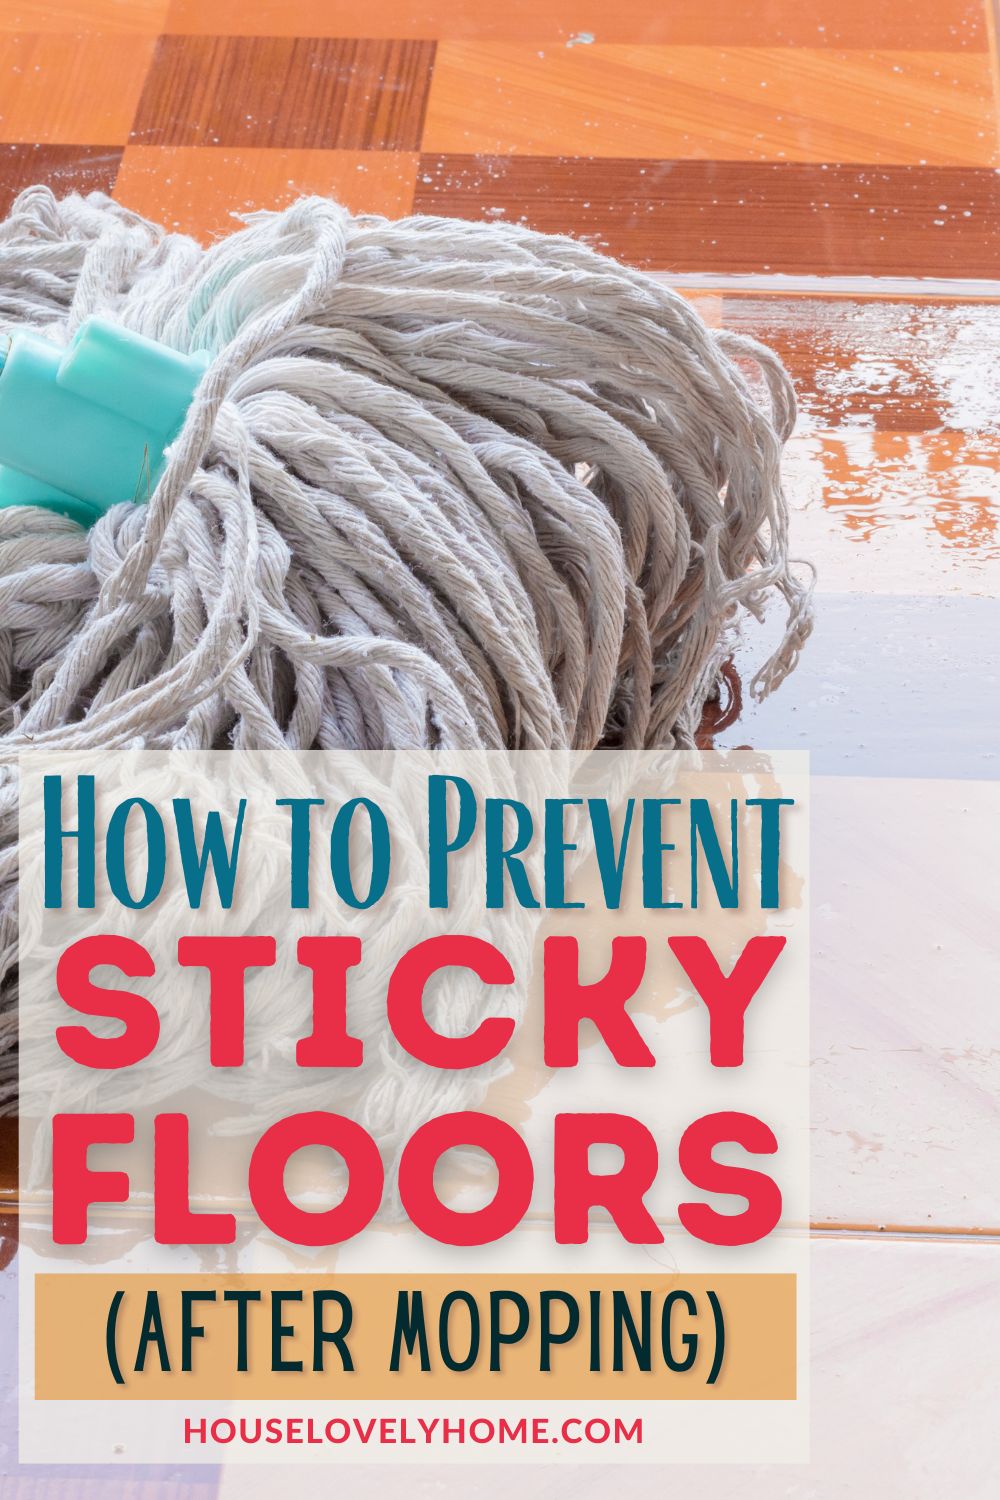 How to Prevent Sticky Floors (After Mopping) Pin Image